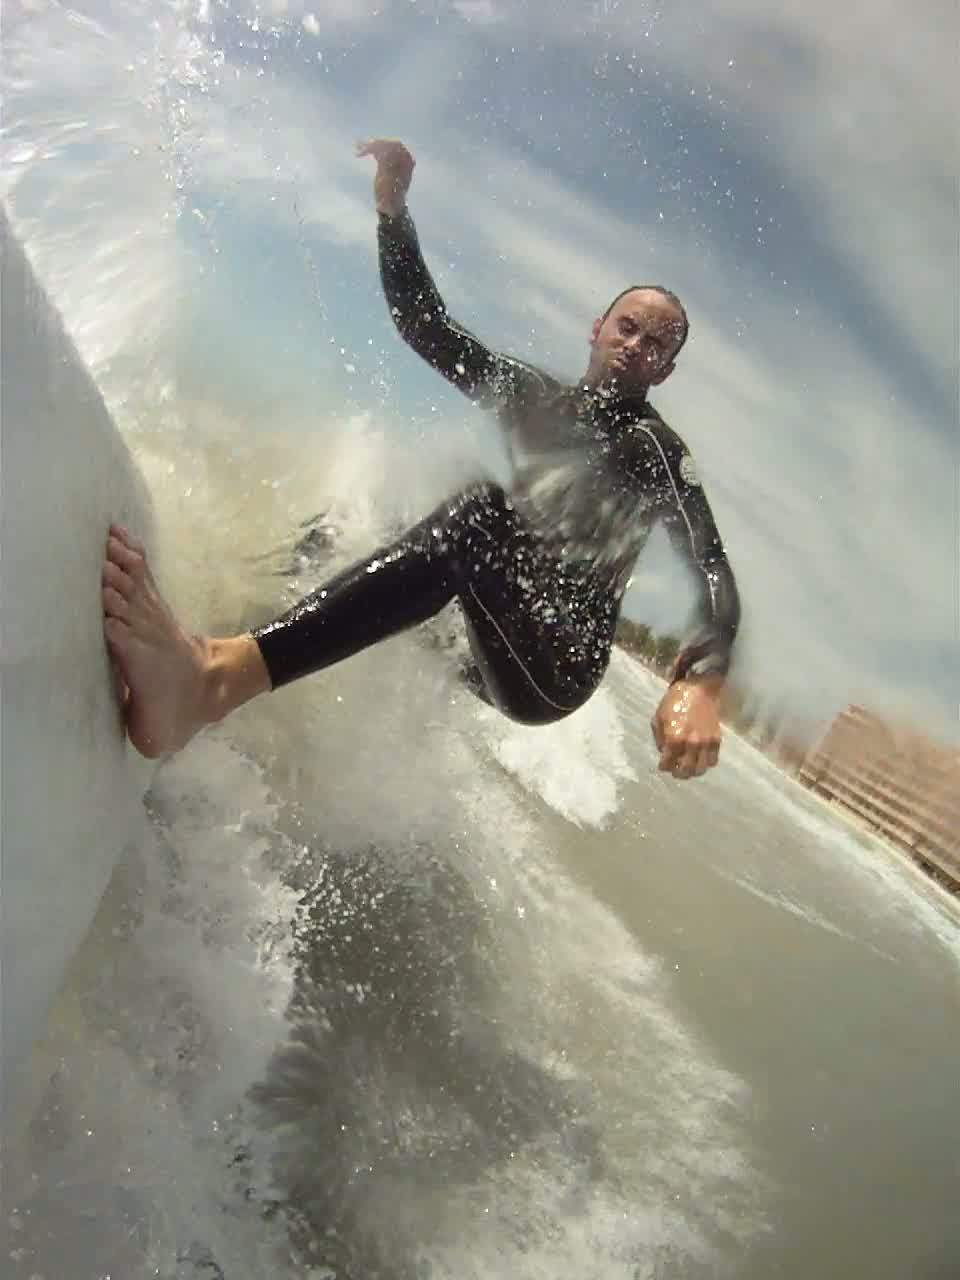 action cam mounted on surfboard